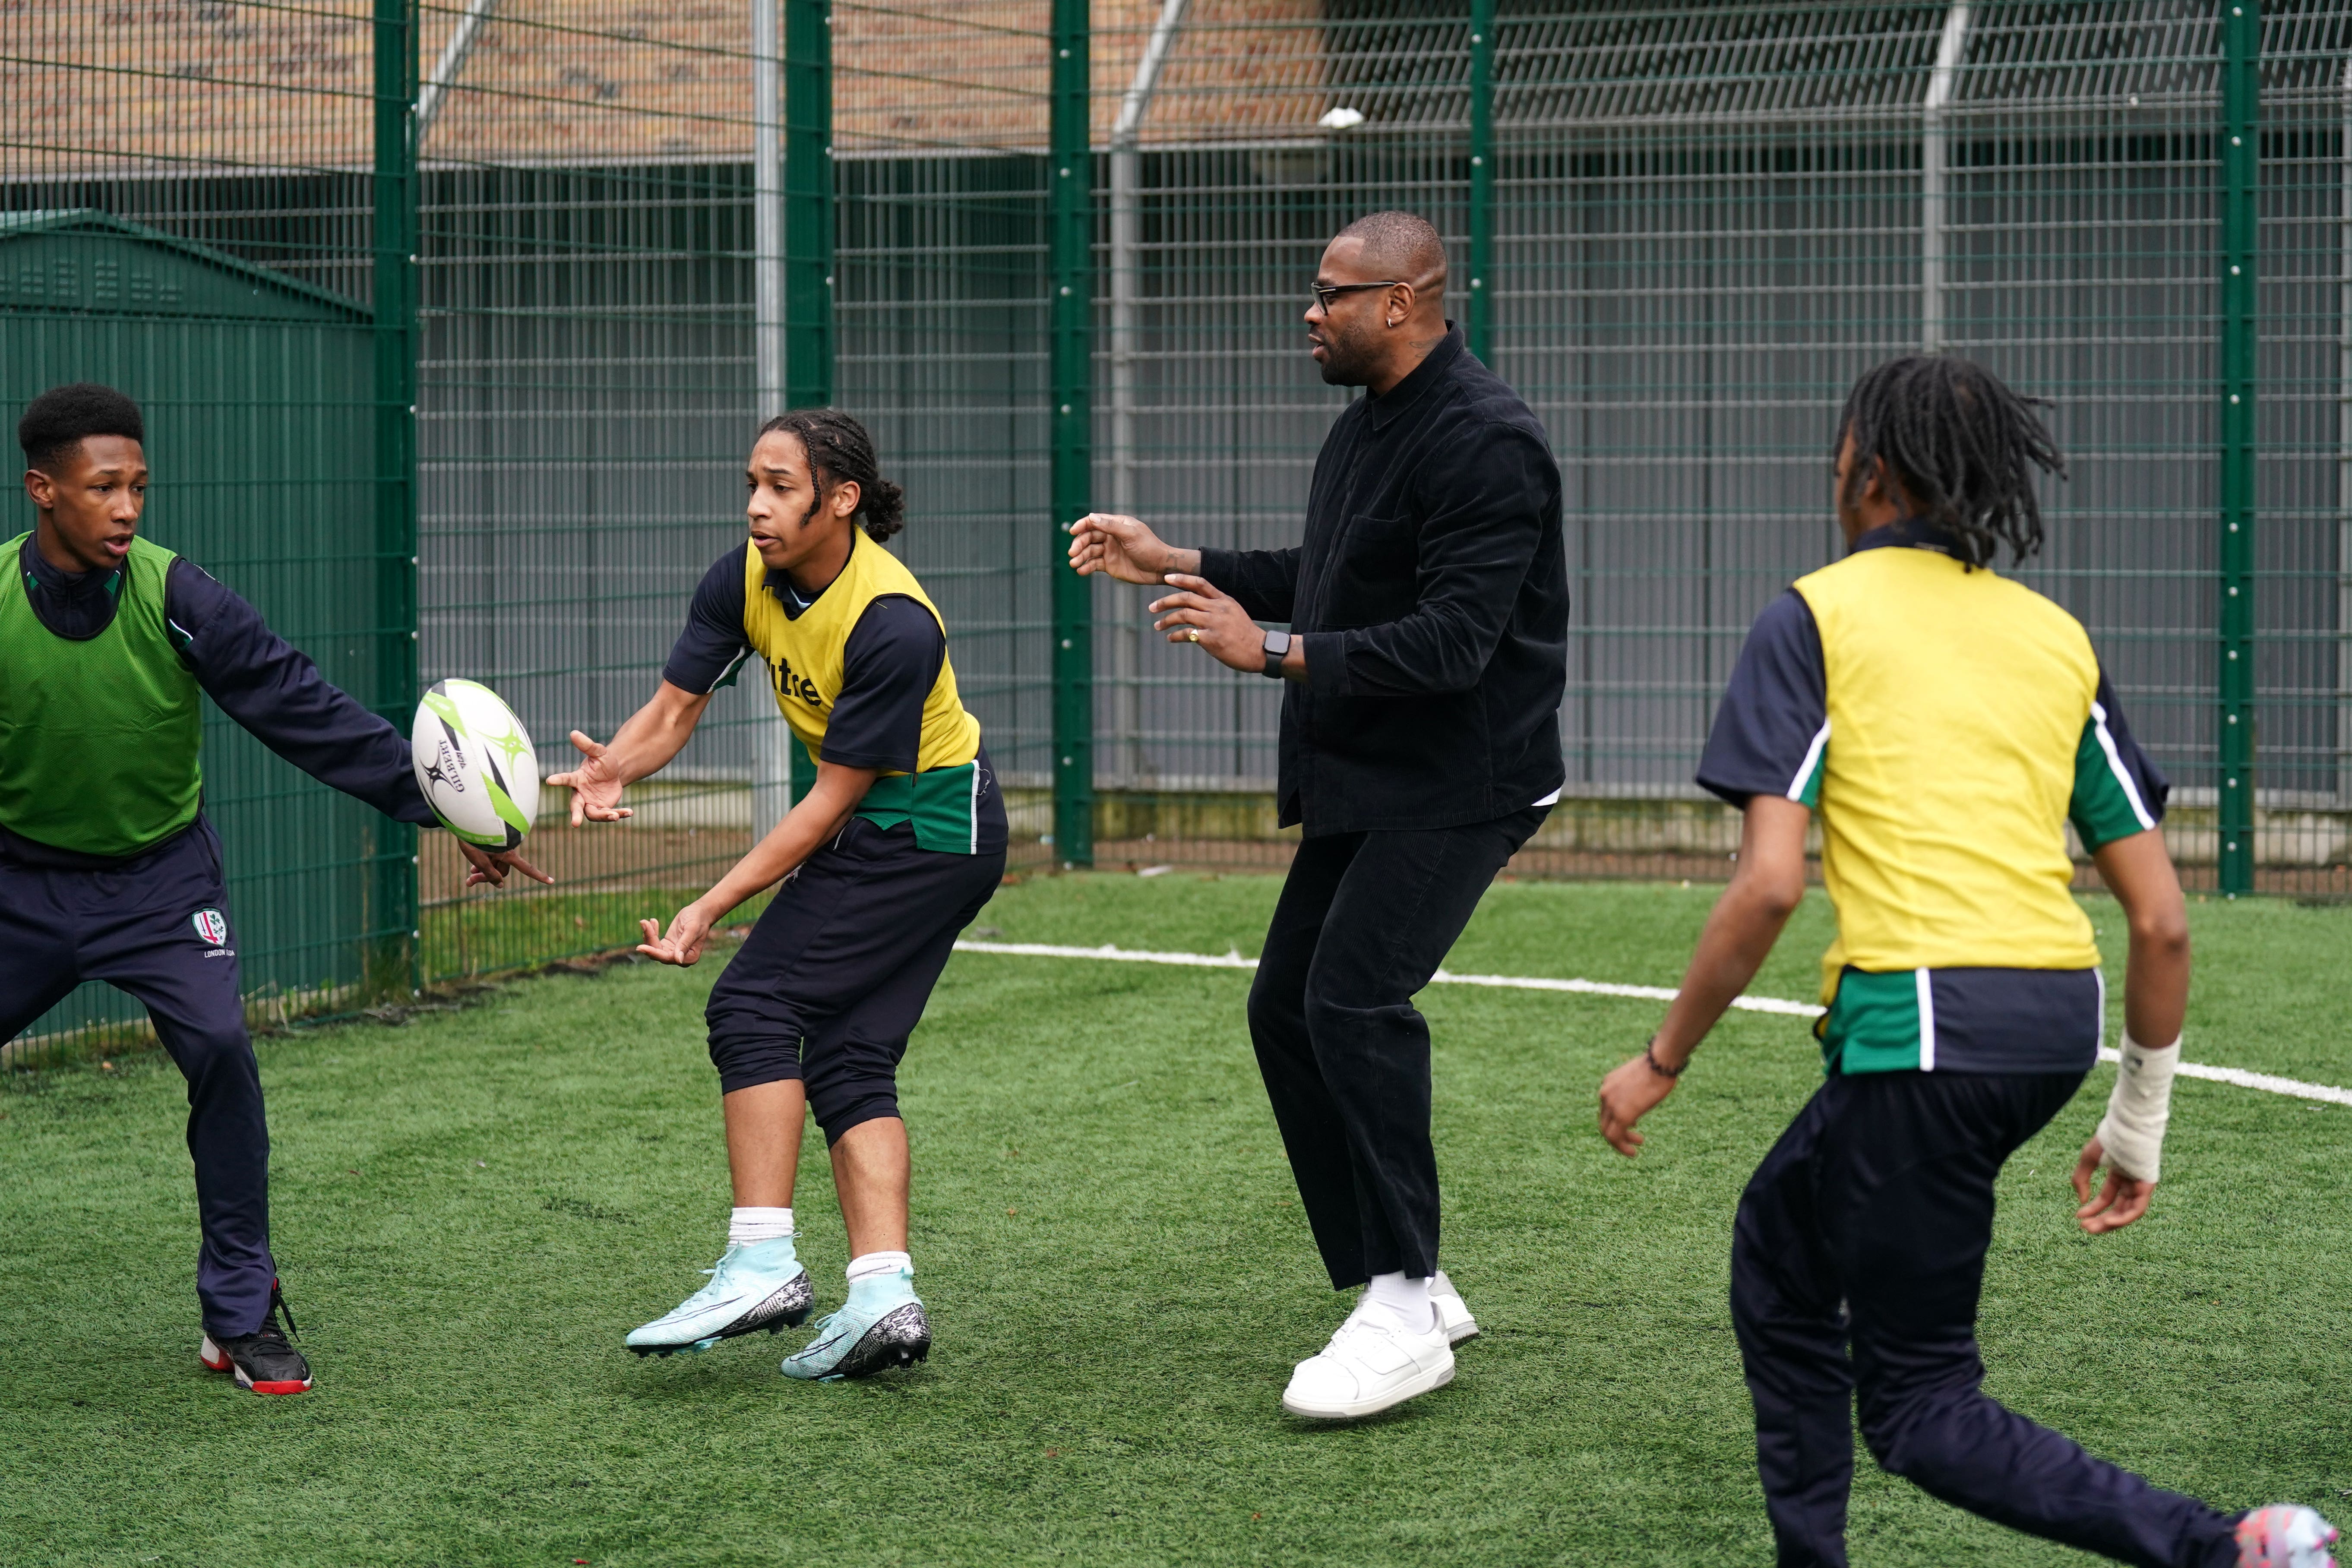 Former England player Ugo Monye joined a rugby session with youngsters in London. (Adam Davy/PA)